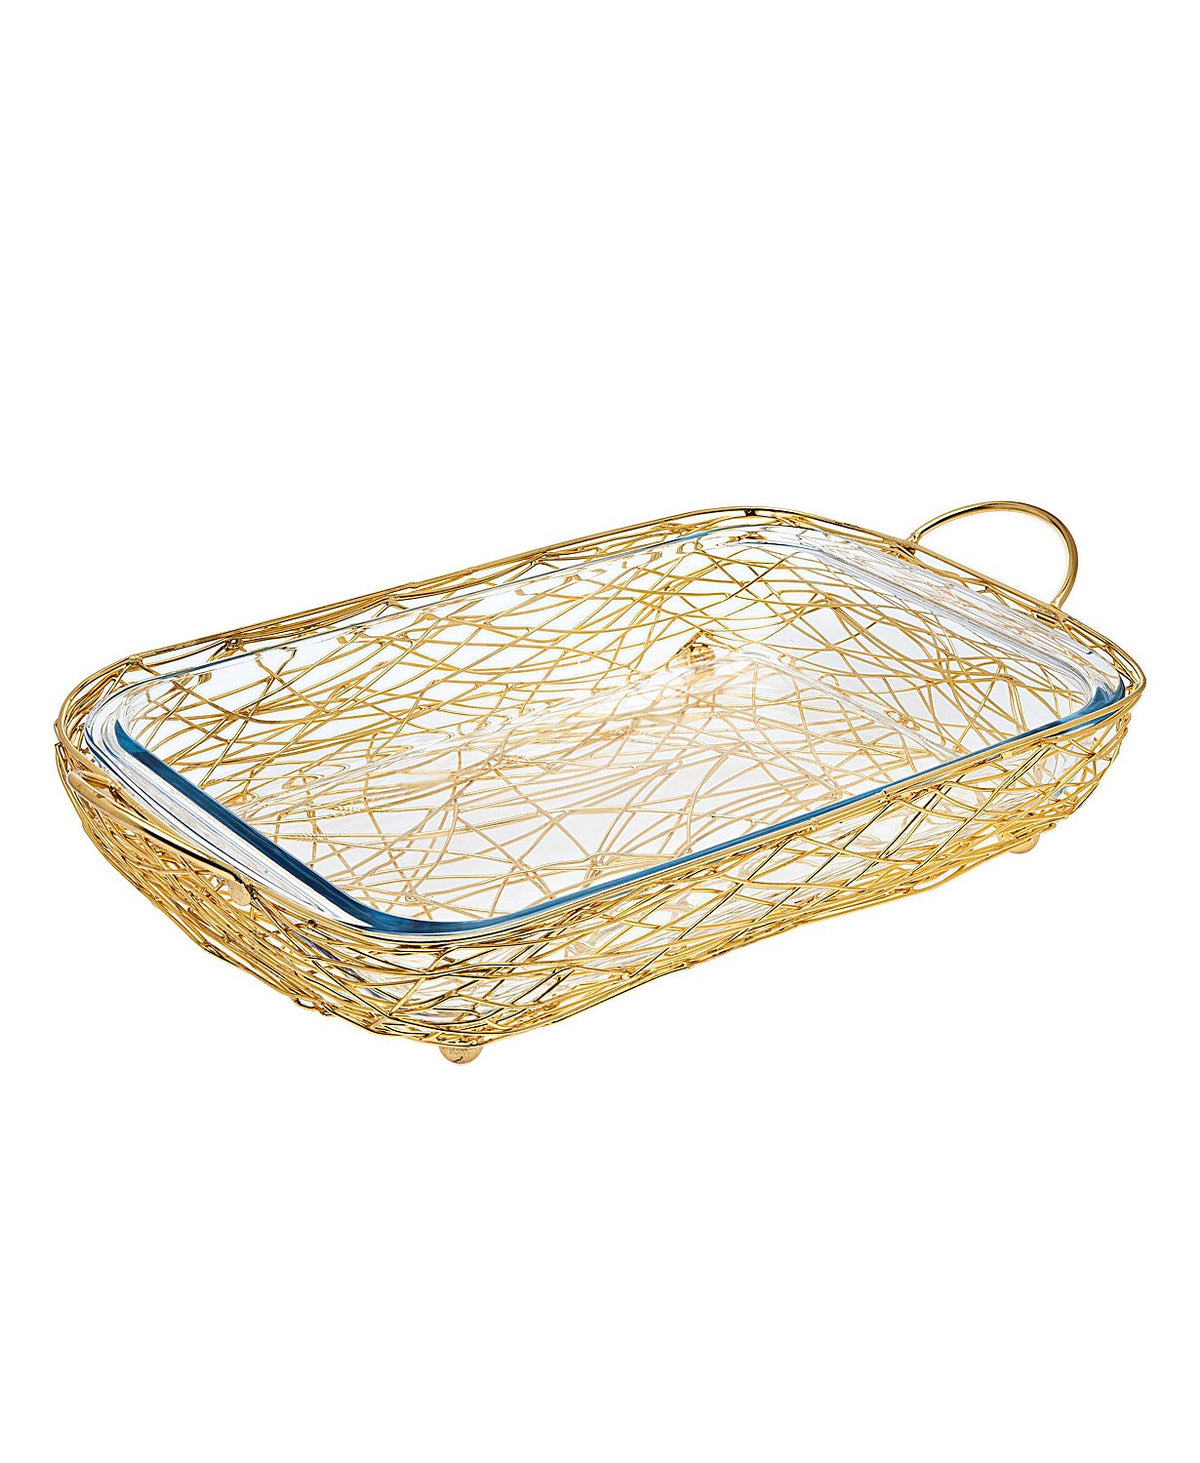 Oven To Table Baker With Sparkling Serving Stand (Rectangle, Gold Mesh Weave)